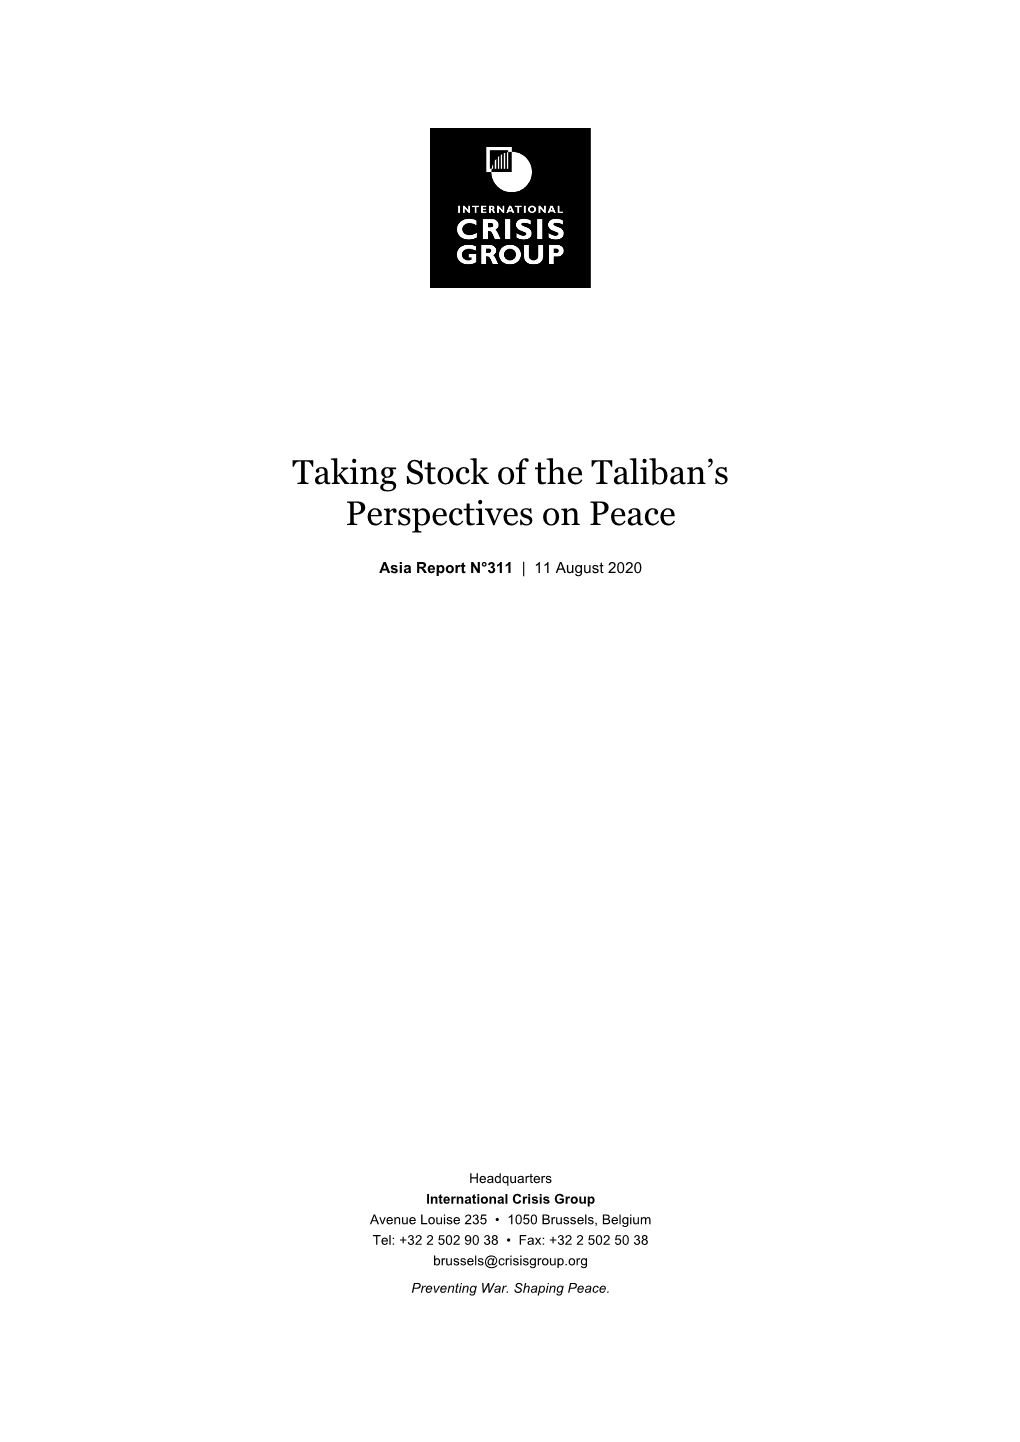 Taking Stock of Taliban Perspectives on Peace